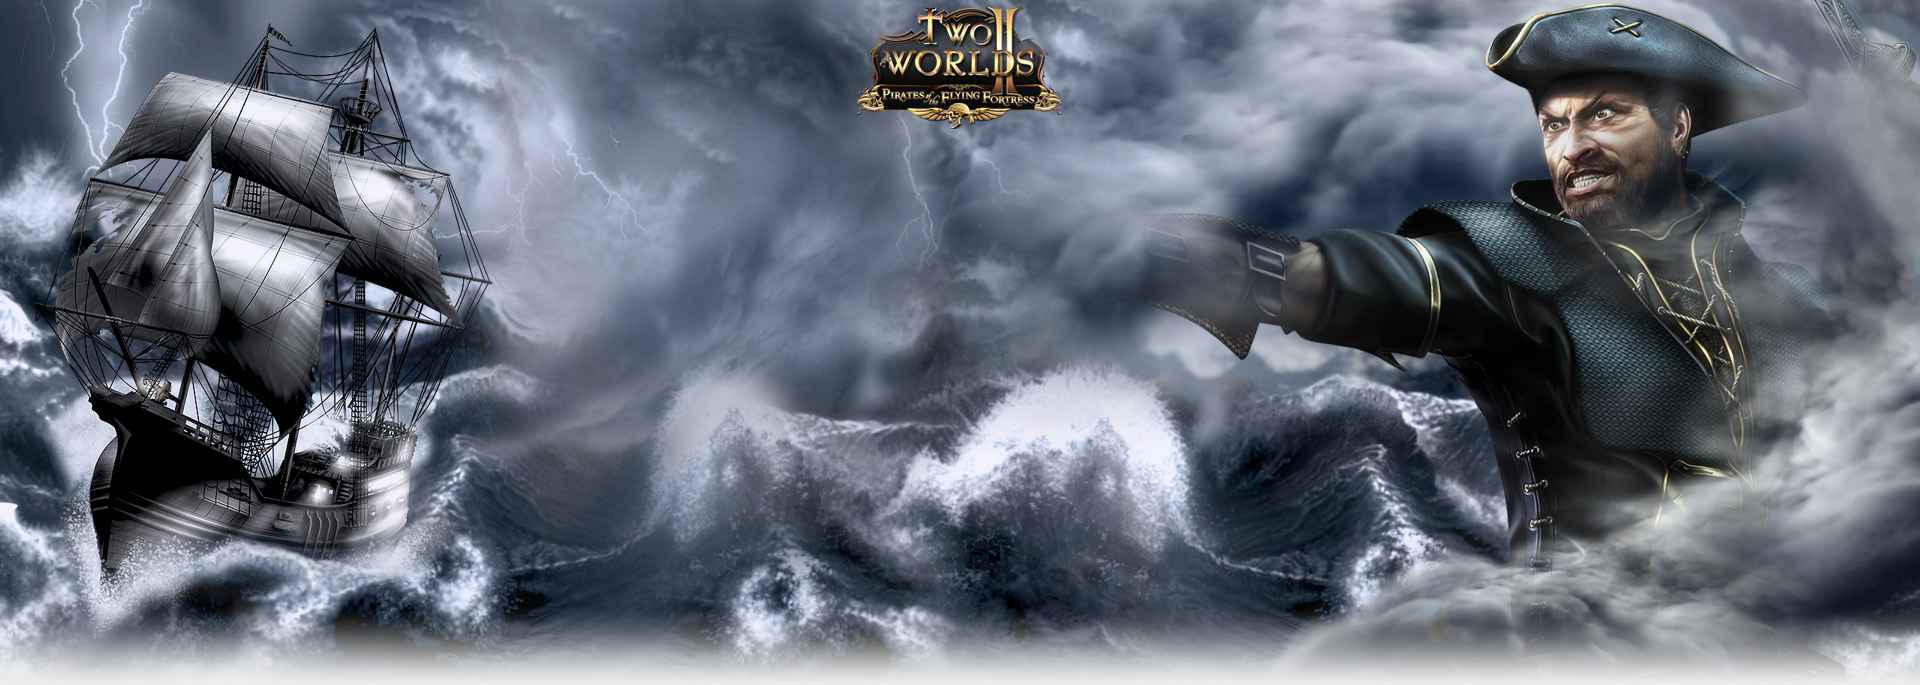 two worlds 2 pirates of flying fortress download